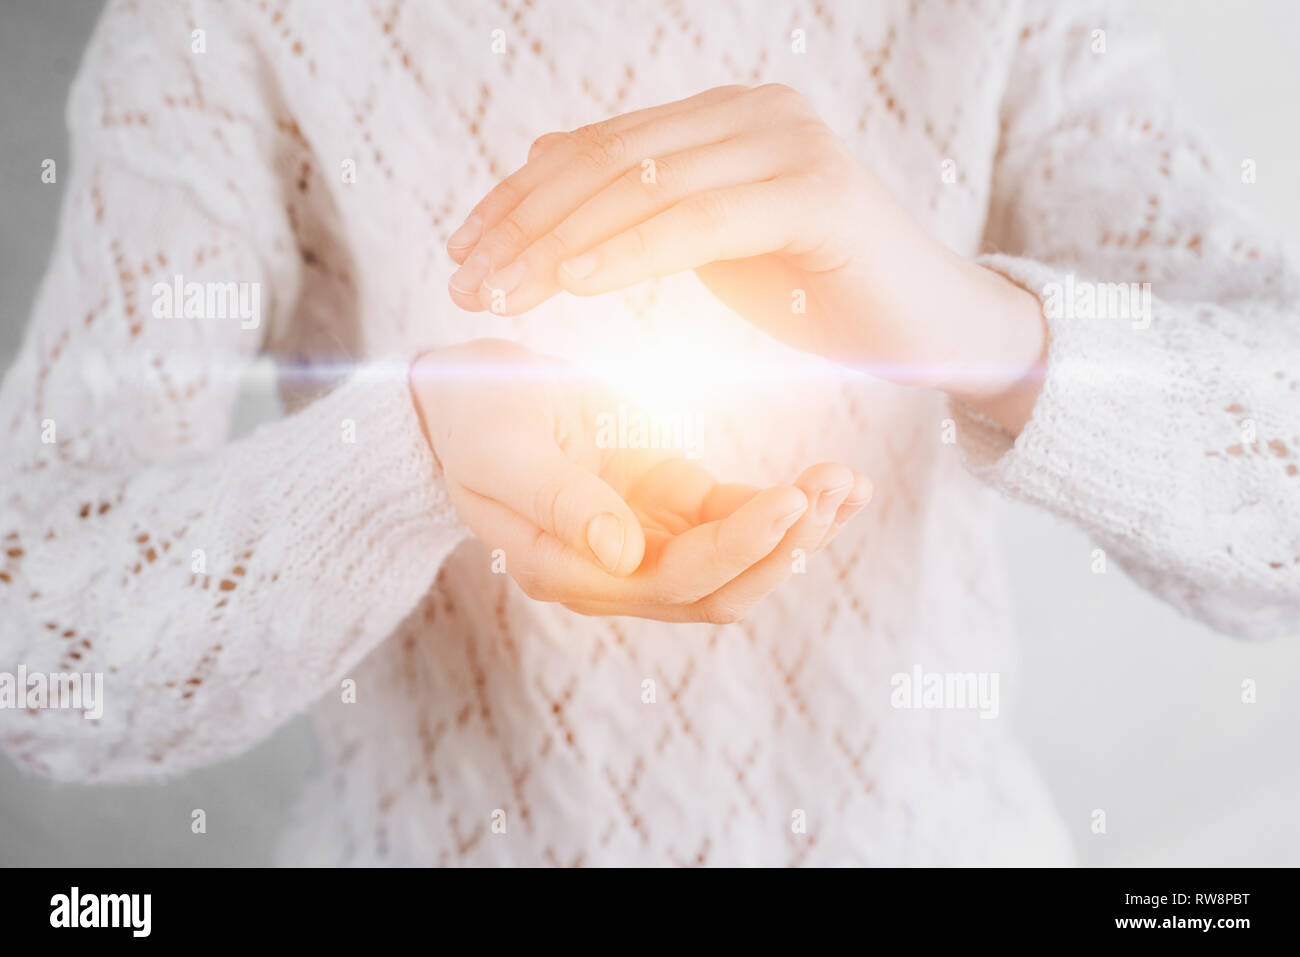 Light in young woman hands offering help, protection and support symbol. Sharing hope concept Stock Photo